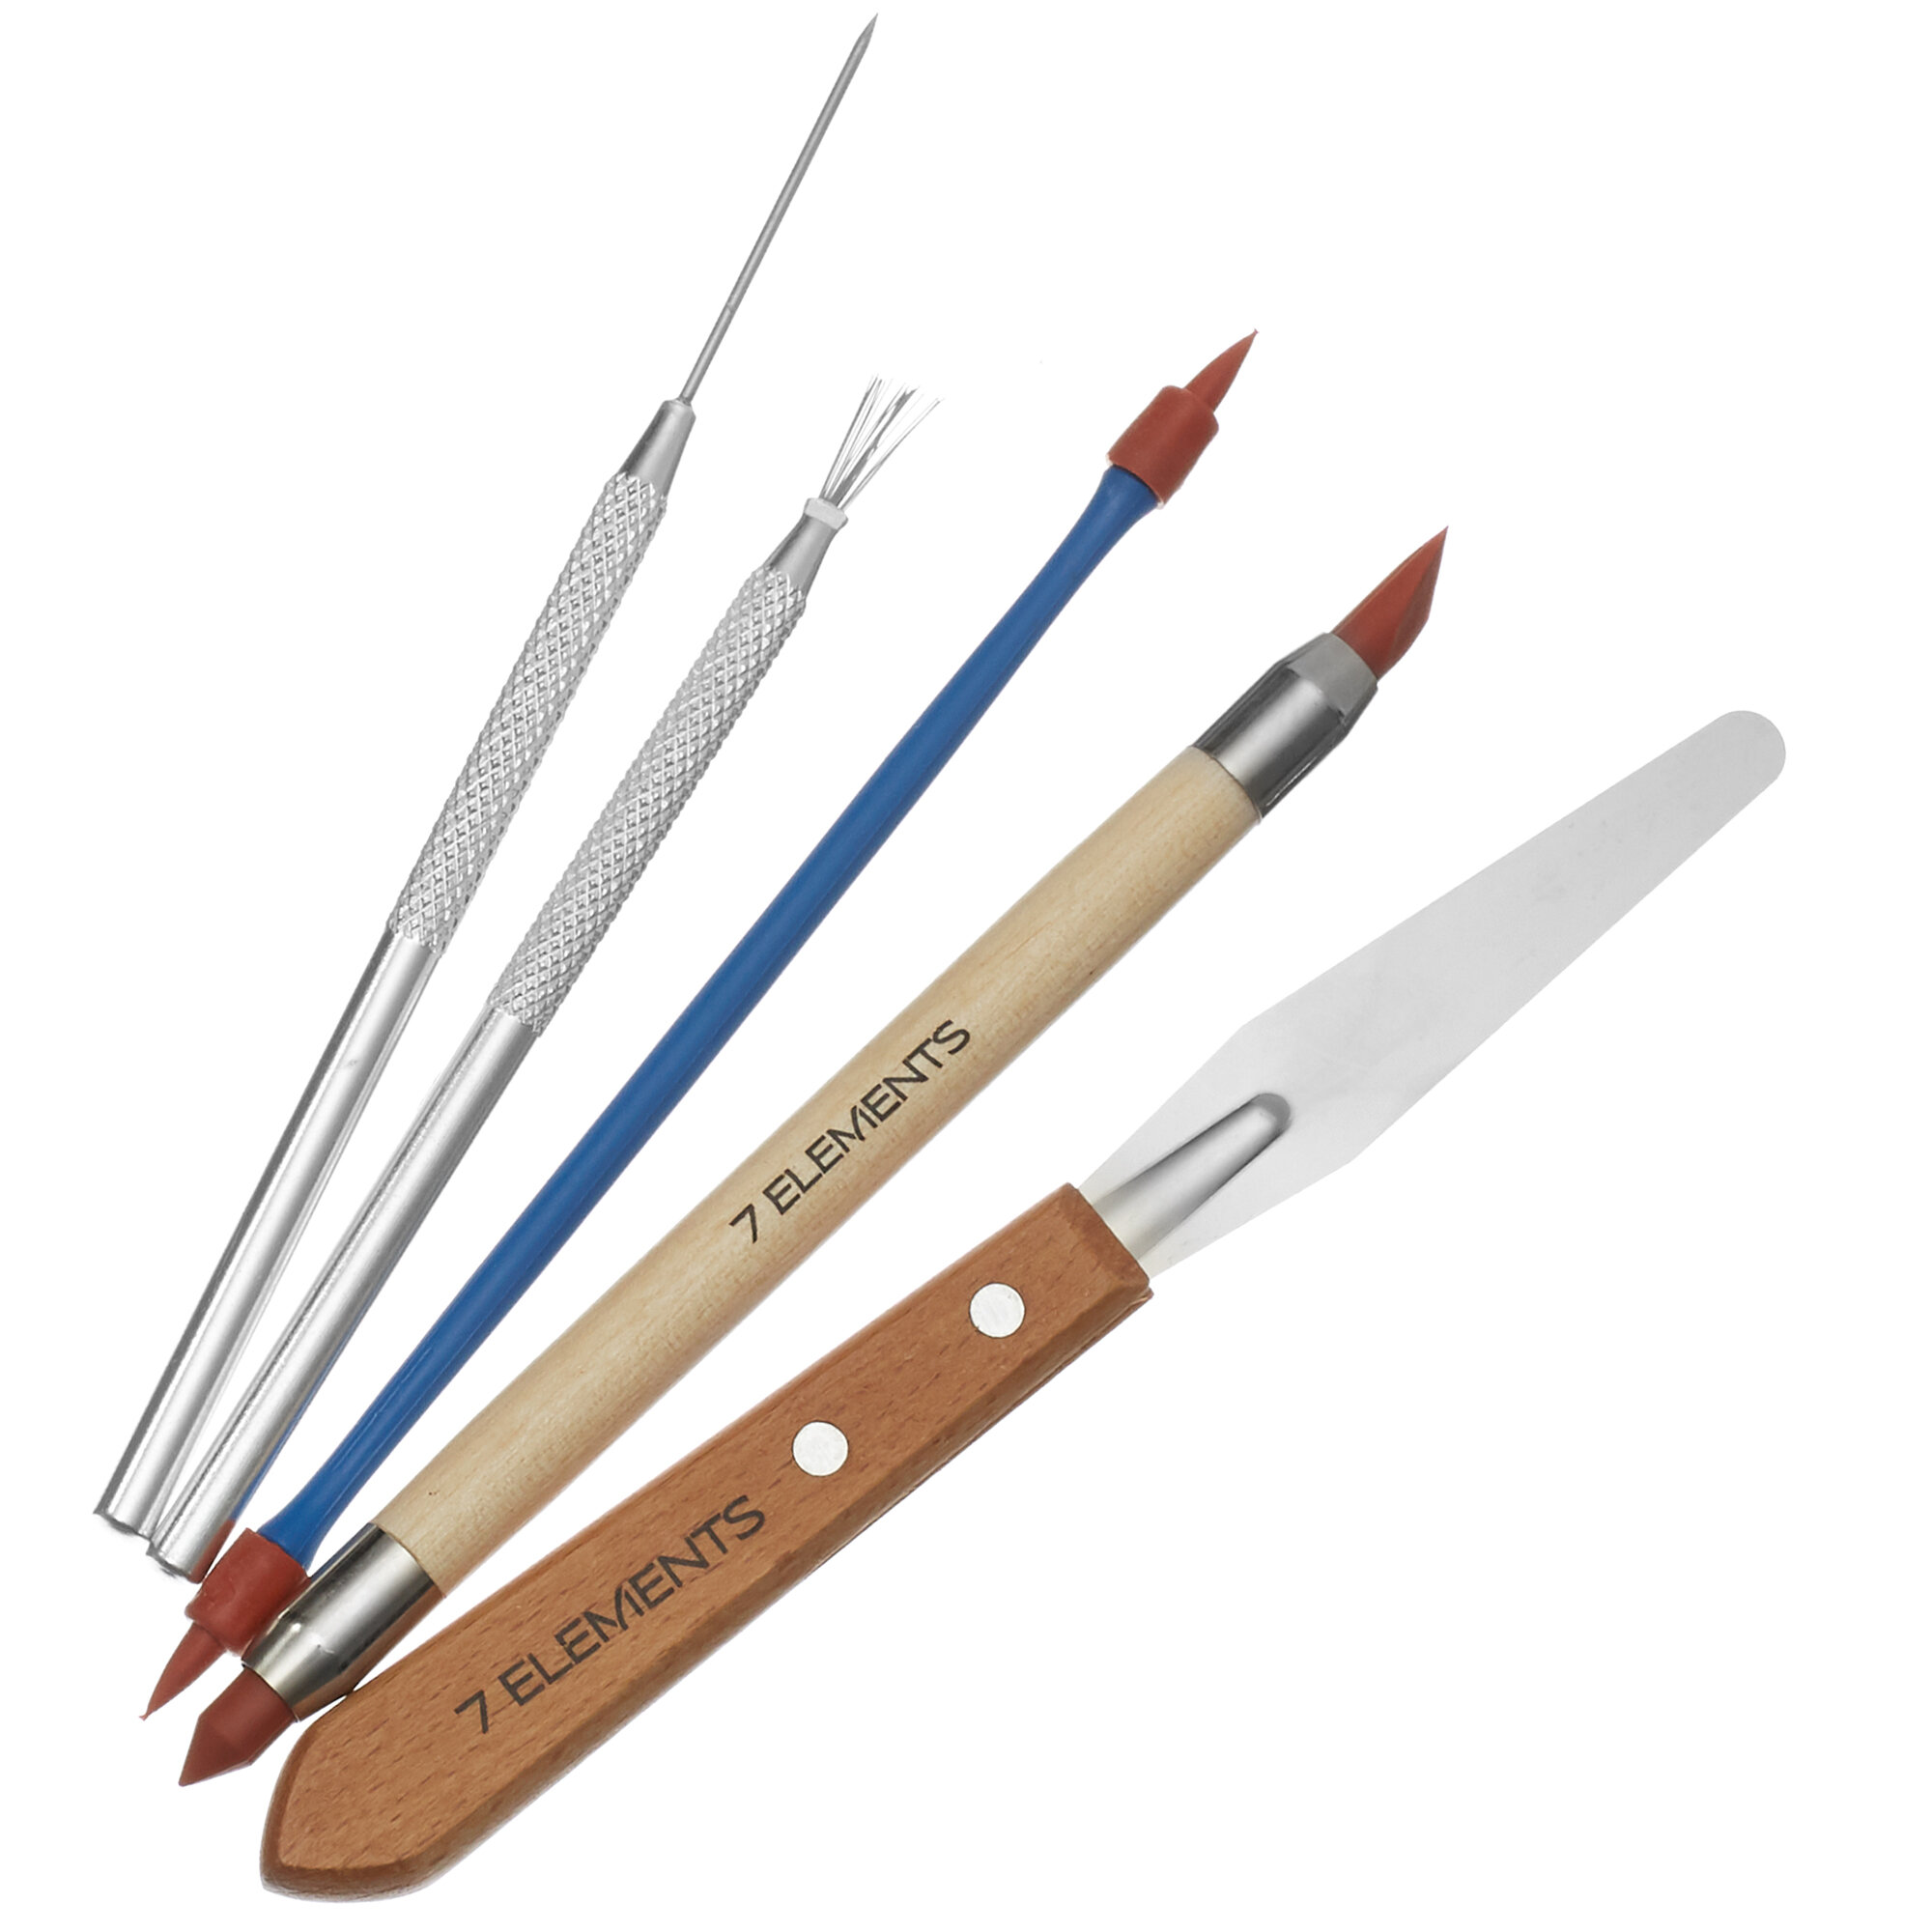 7 Elements 42-Piece Clay Pottery Tool Set